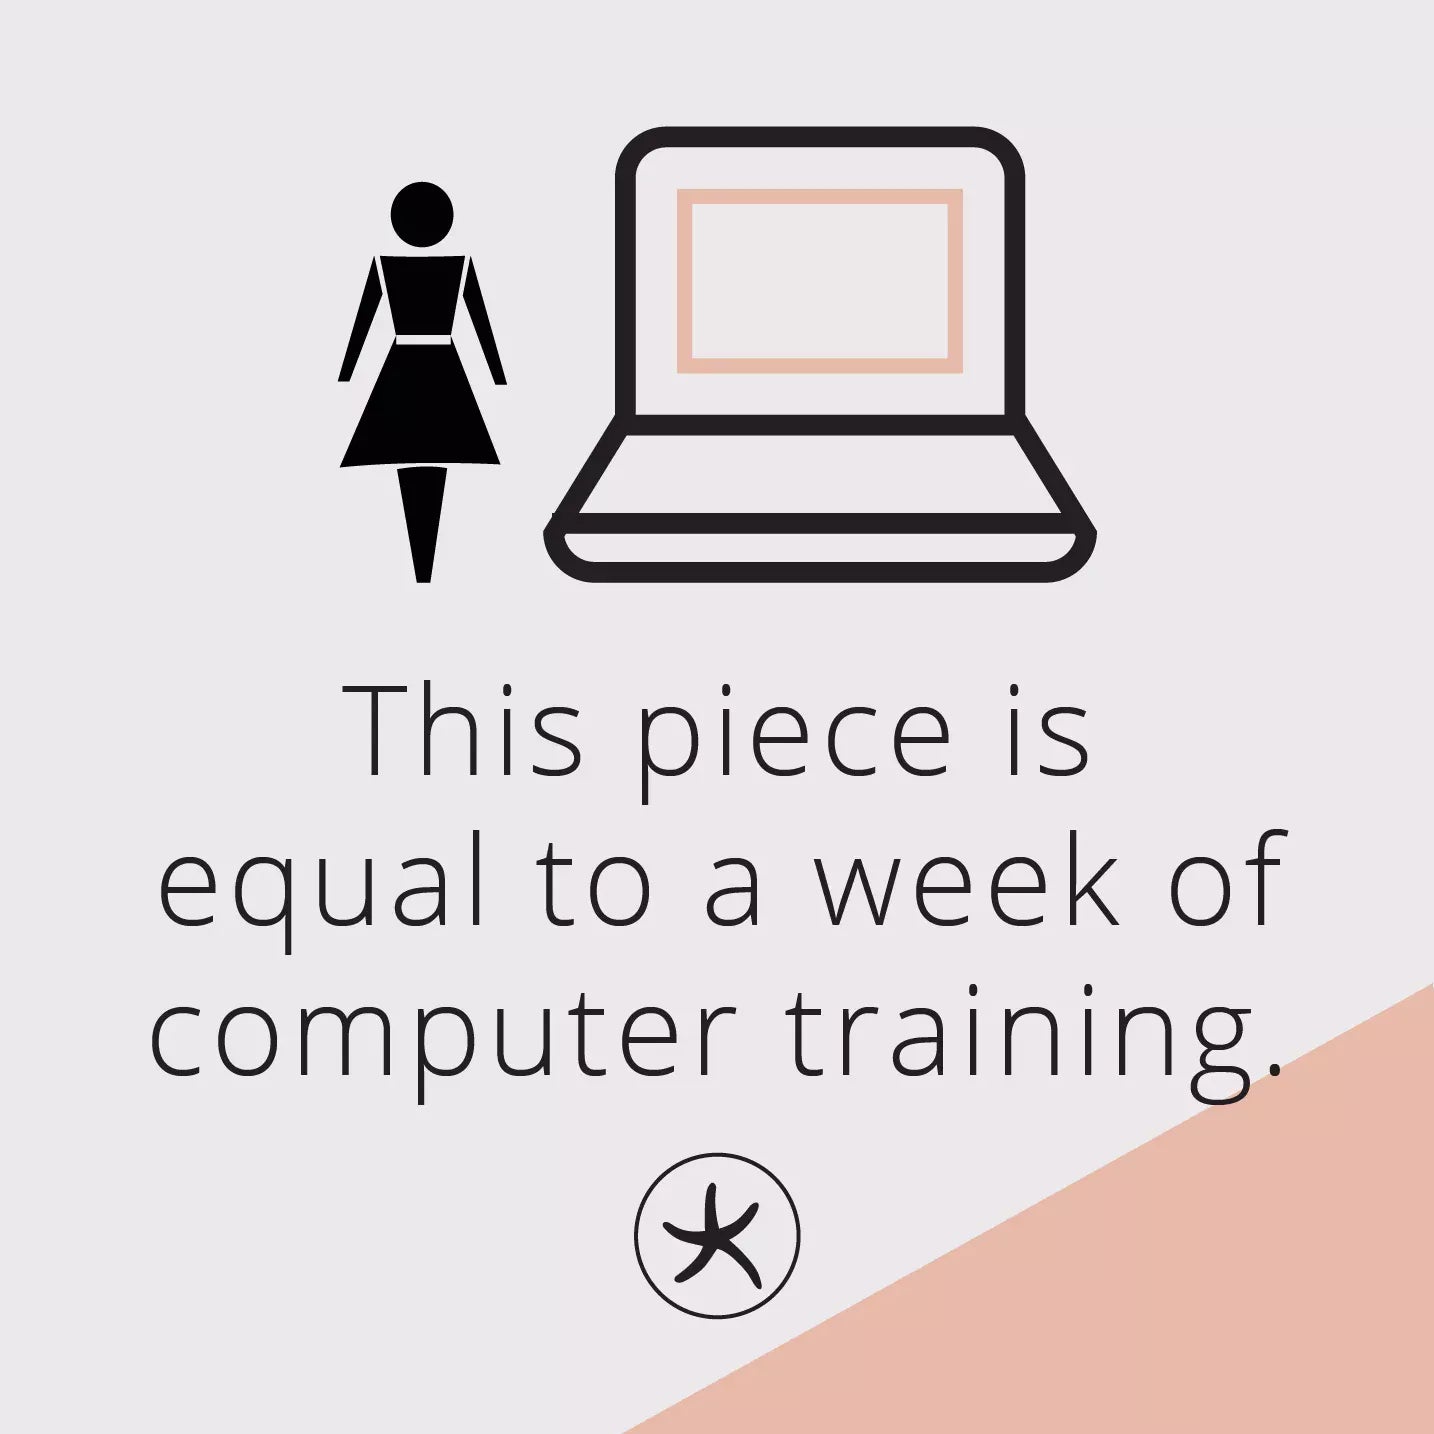 This piece is equal to a week of computer training.